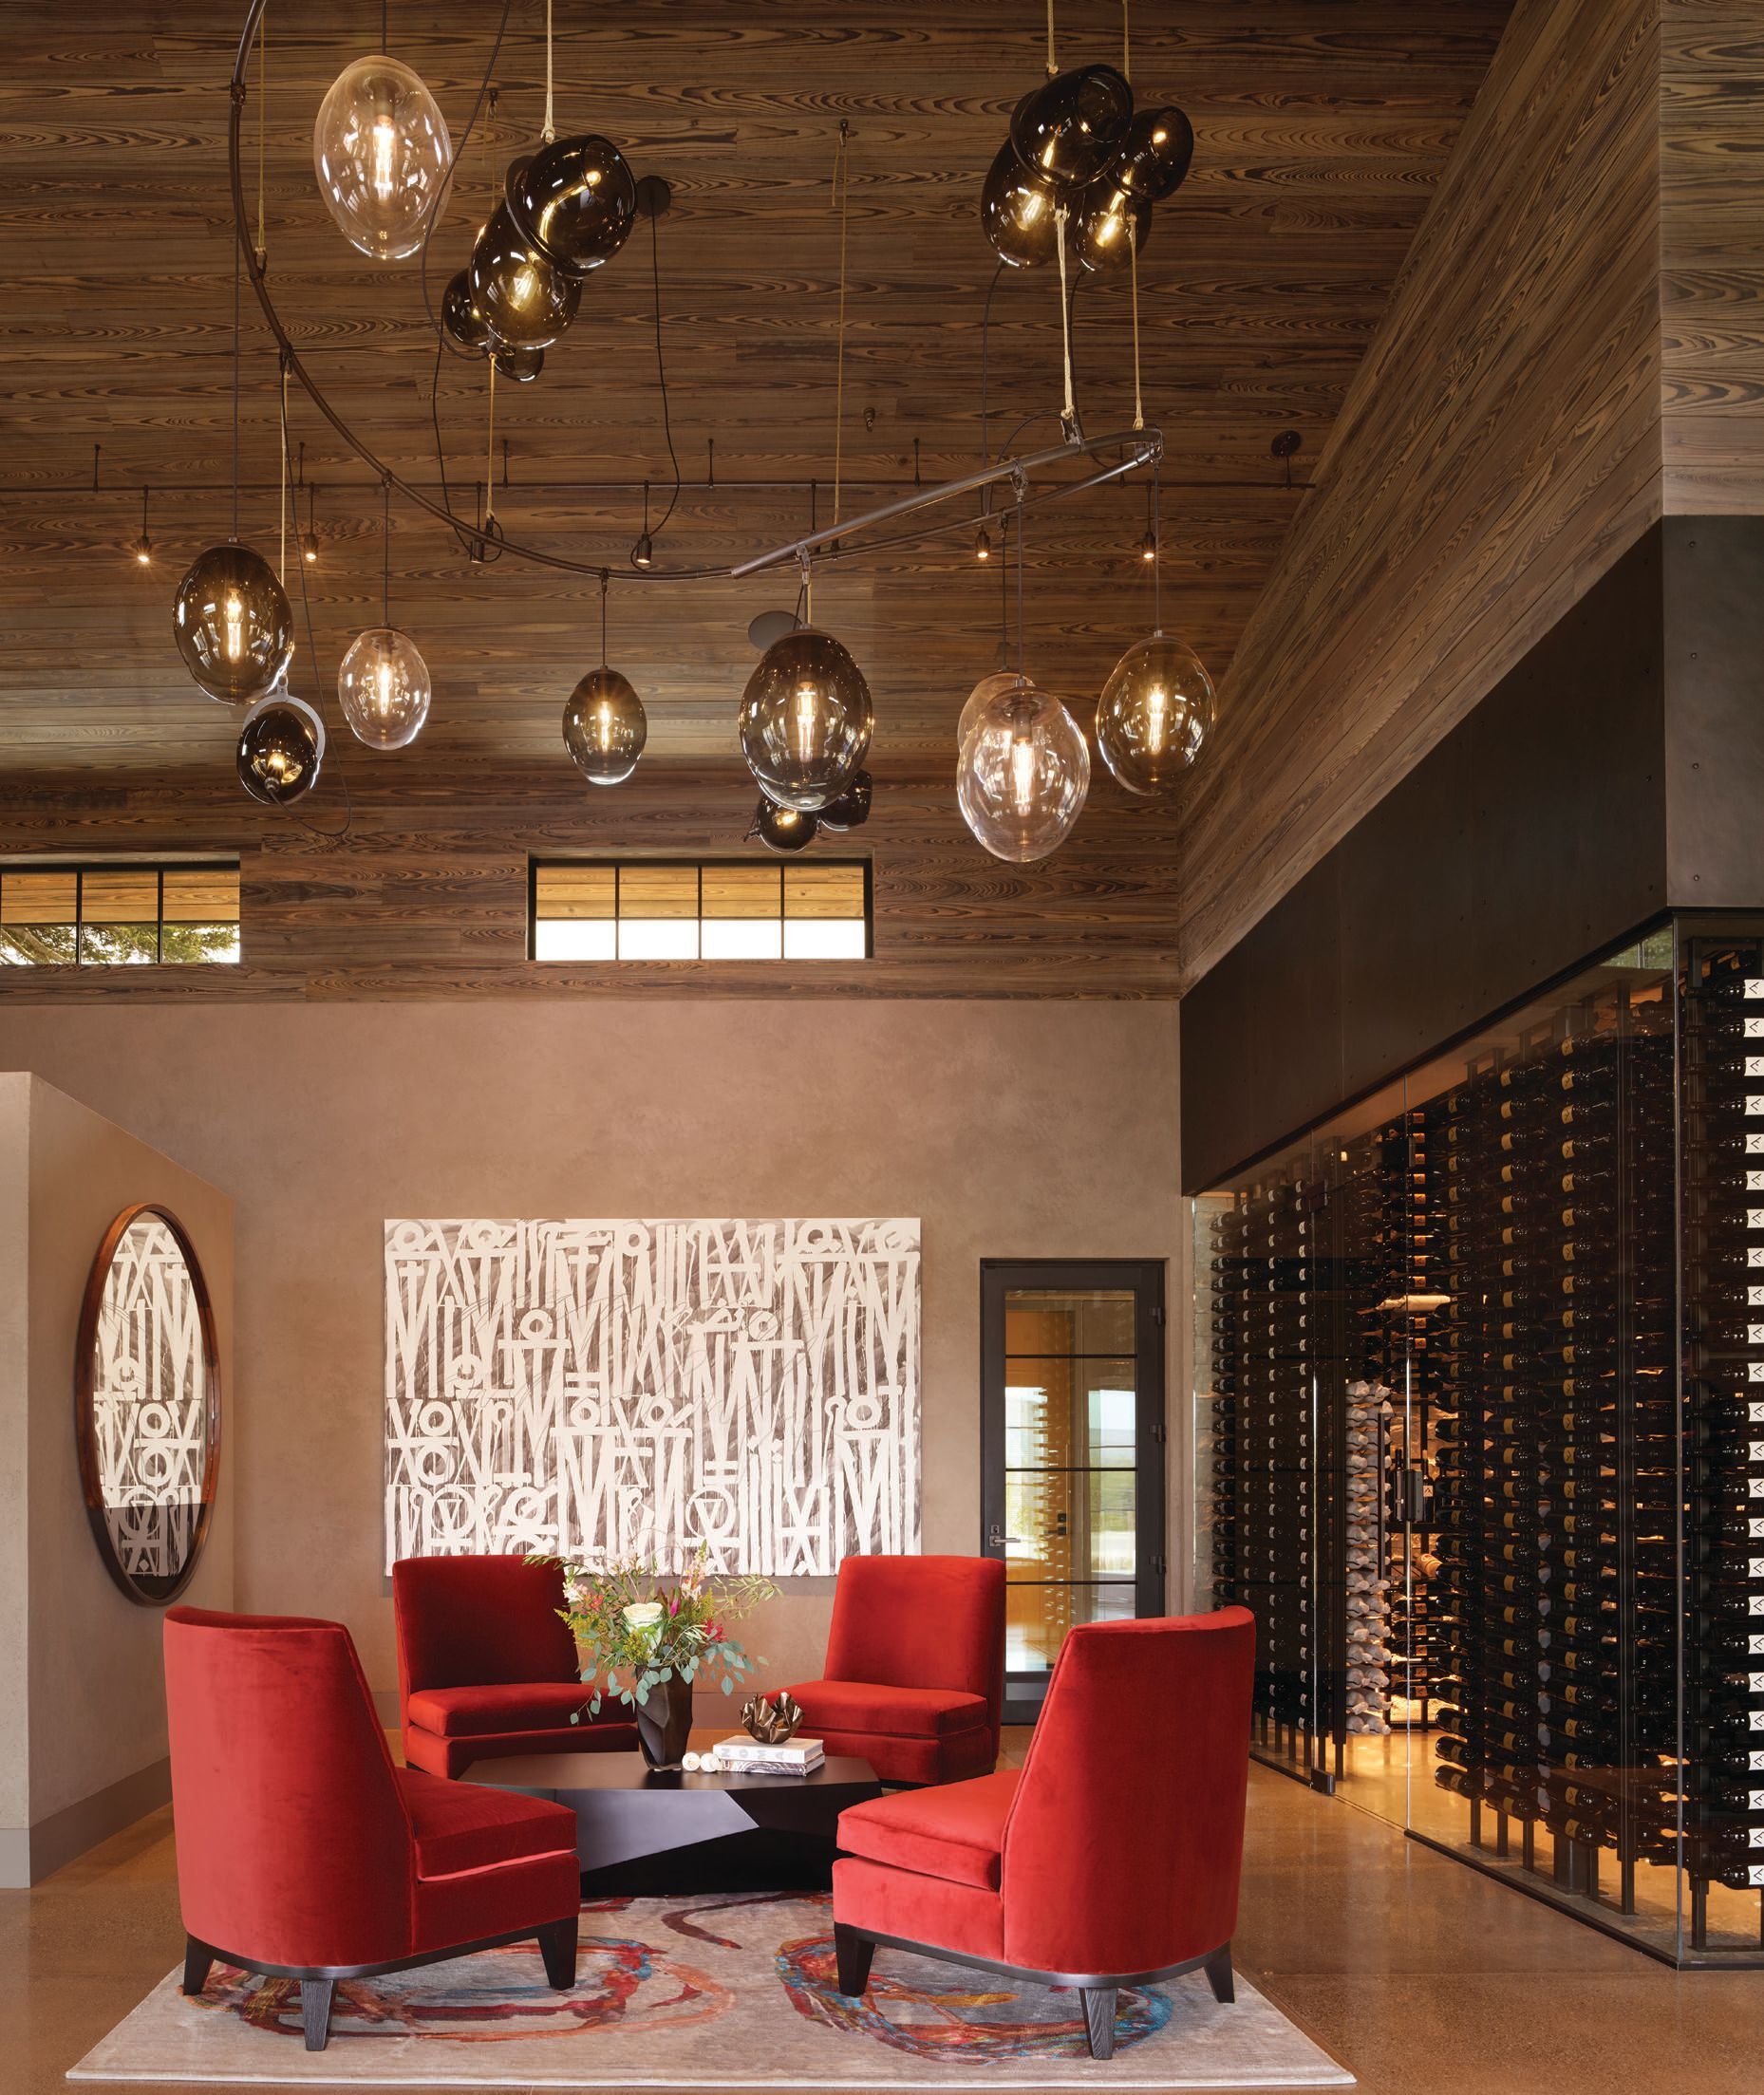 The new tasting room
at Napa’s Seven Apart Winery. PHOTO BY PAUL DYER